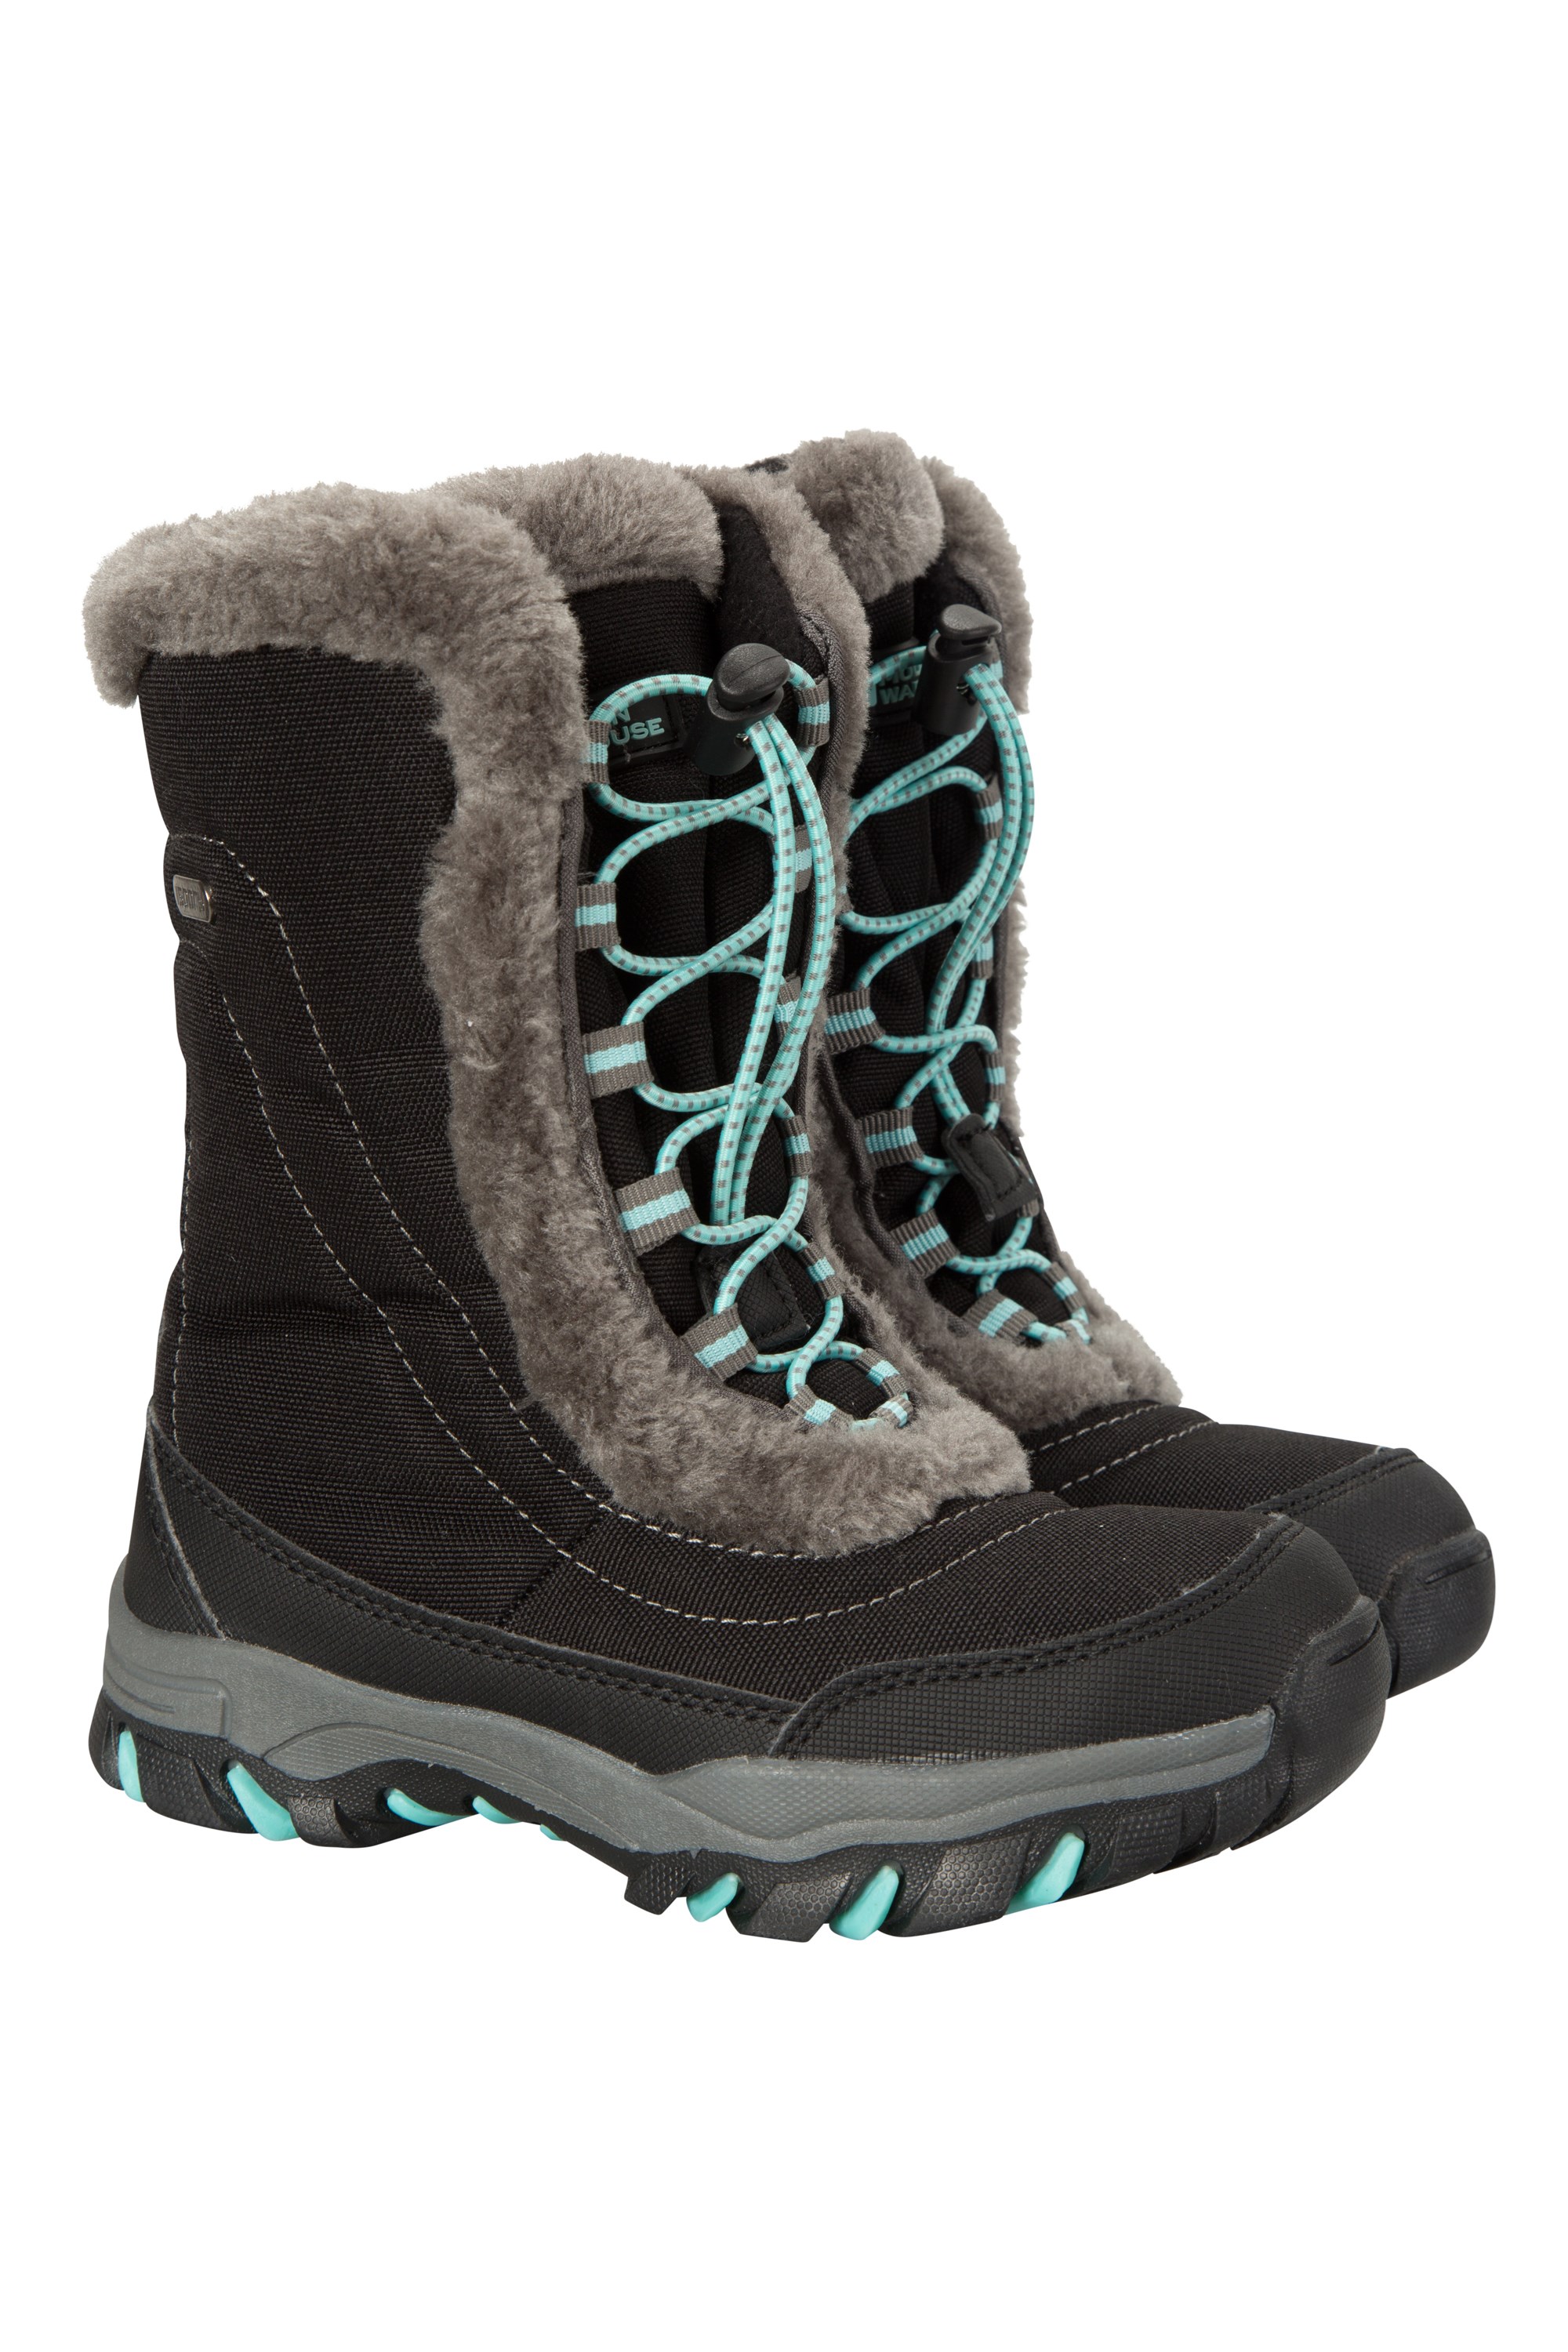 youth snow boots